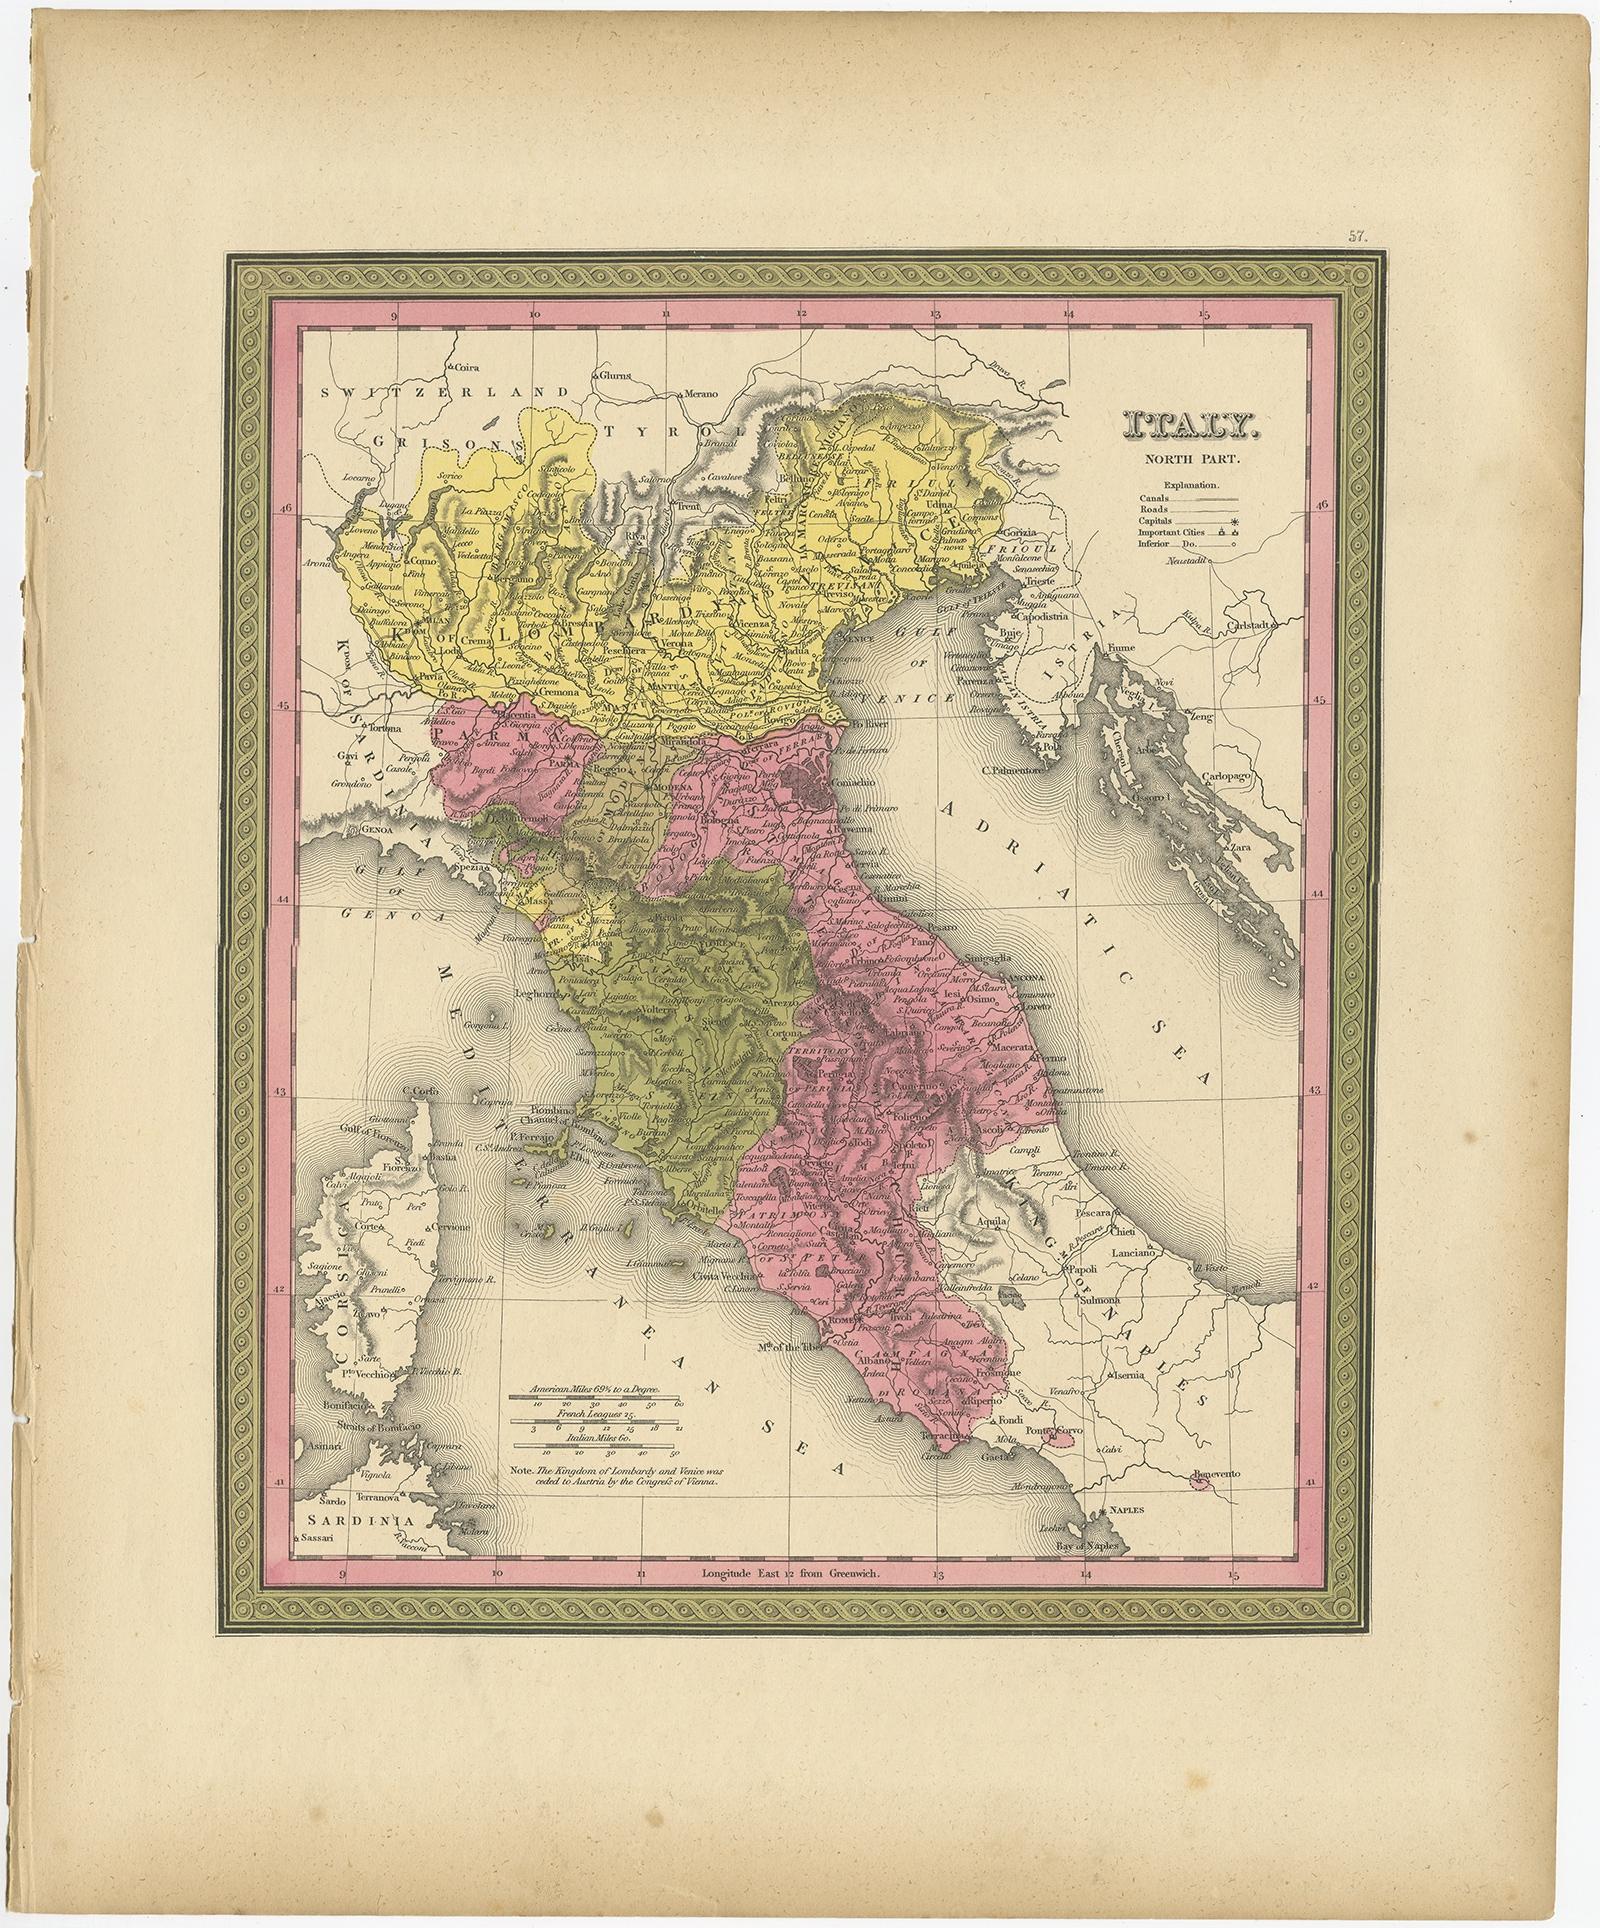 Description: Antique map titled 'Italy North Part'. 

Old map of Northern Italy. This map originates from 'A New Universal Atlas Containing Maps of the various Empires, Kingdoms, States and Republics Of The World (..) by S.A. Mitchell. 

Artists